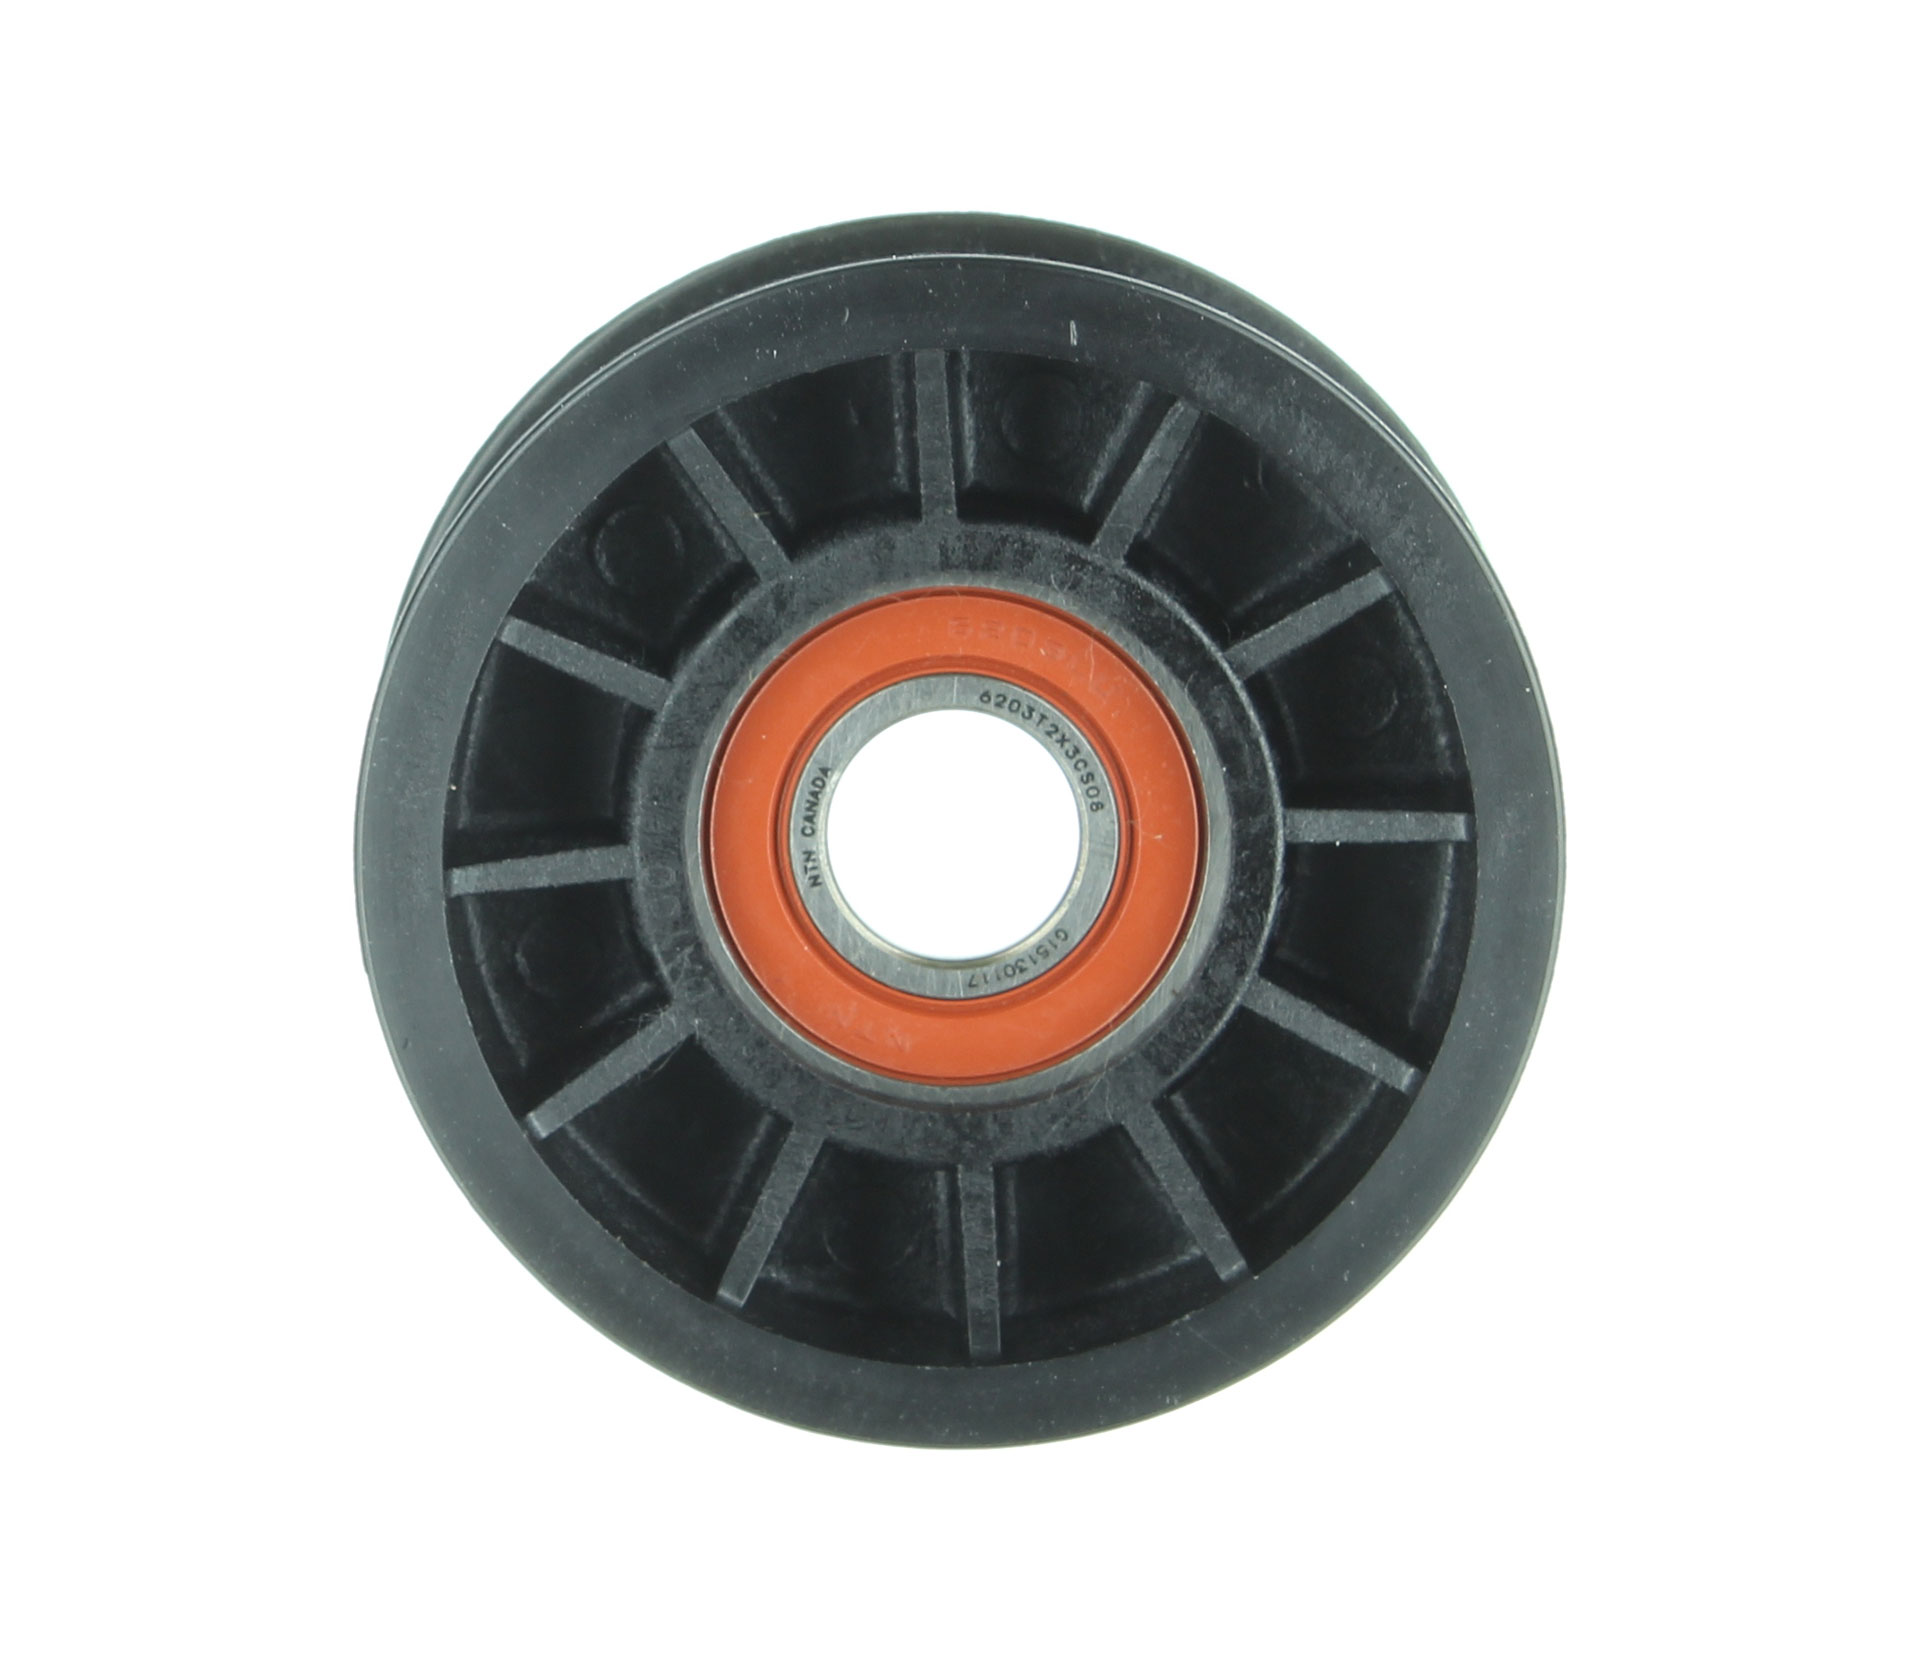 Tensioner Pulley with Lip - PV05821-02